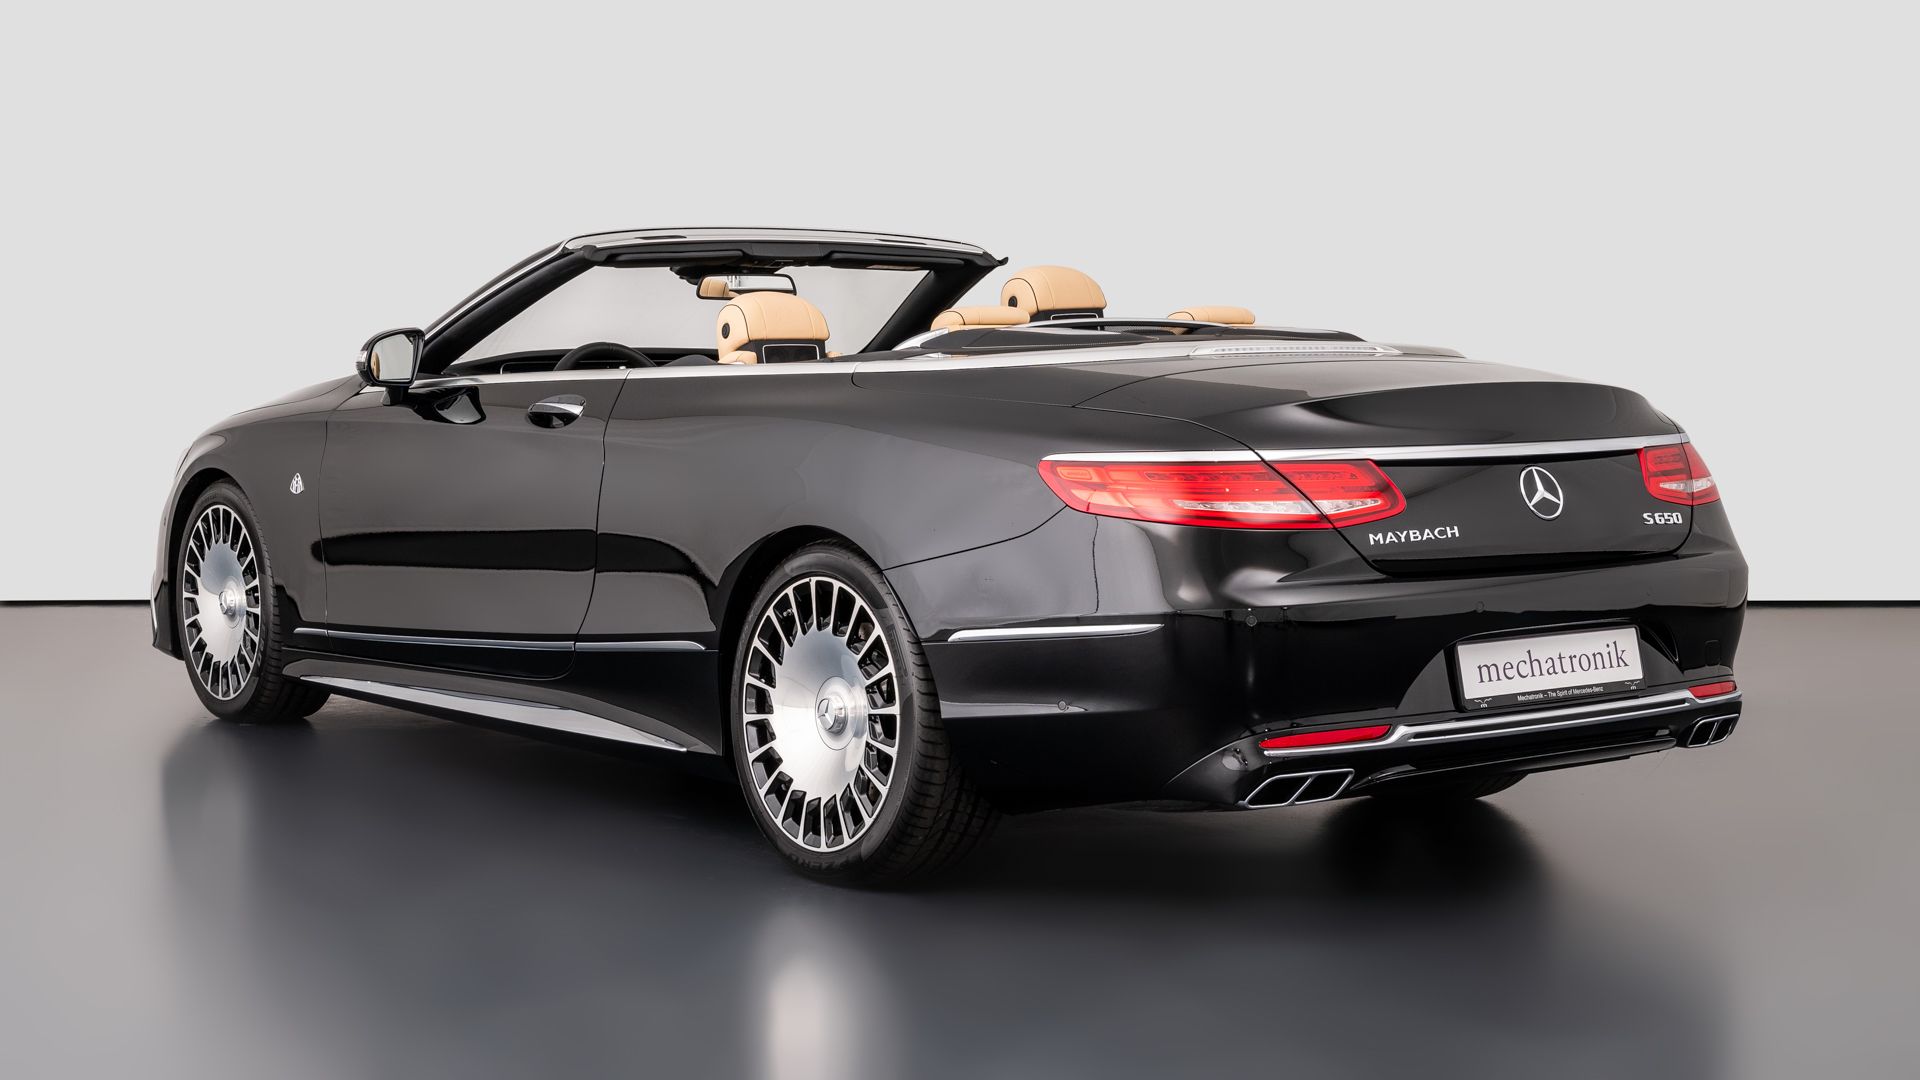 At $357k, Delivery-Mileage 2018 Mercedes-Maybach S650 Cabrio Is A Stranger  To Depreciation | Carscoops